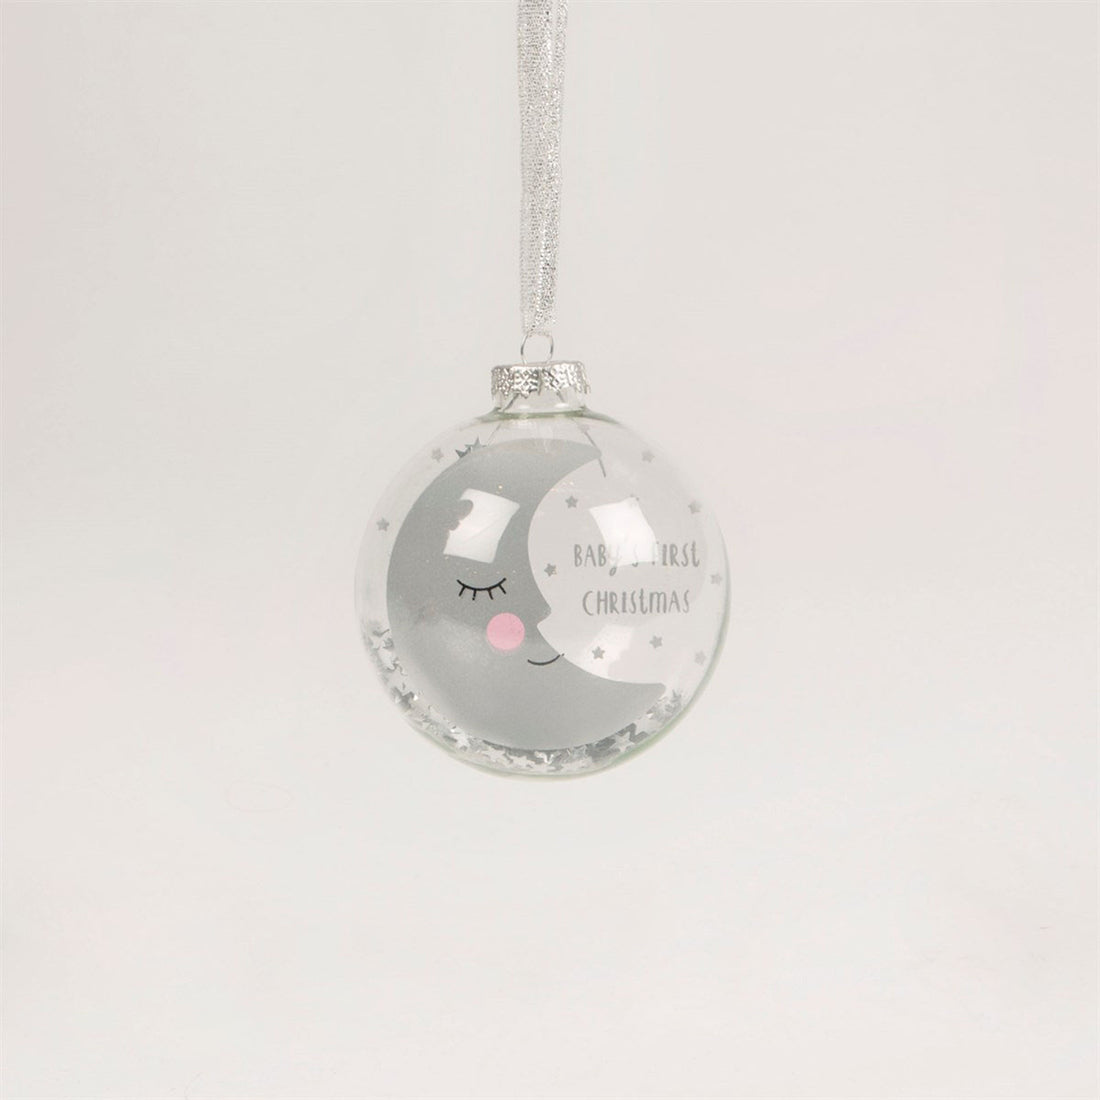 rjb-stone-baby's-first-christmas-sweet-dreams-moon-bauble-01